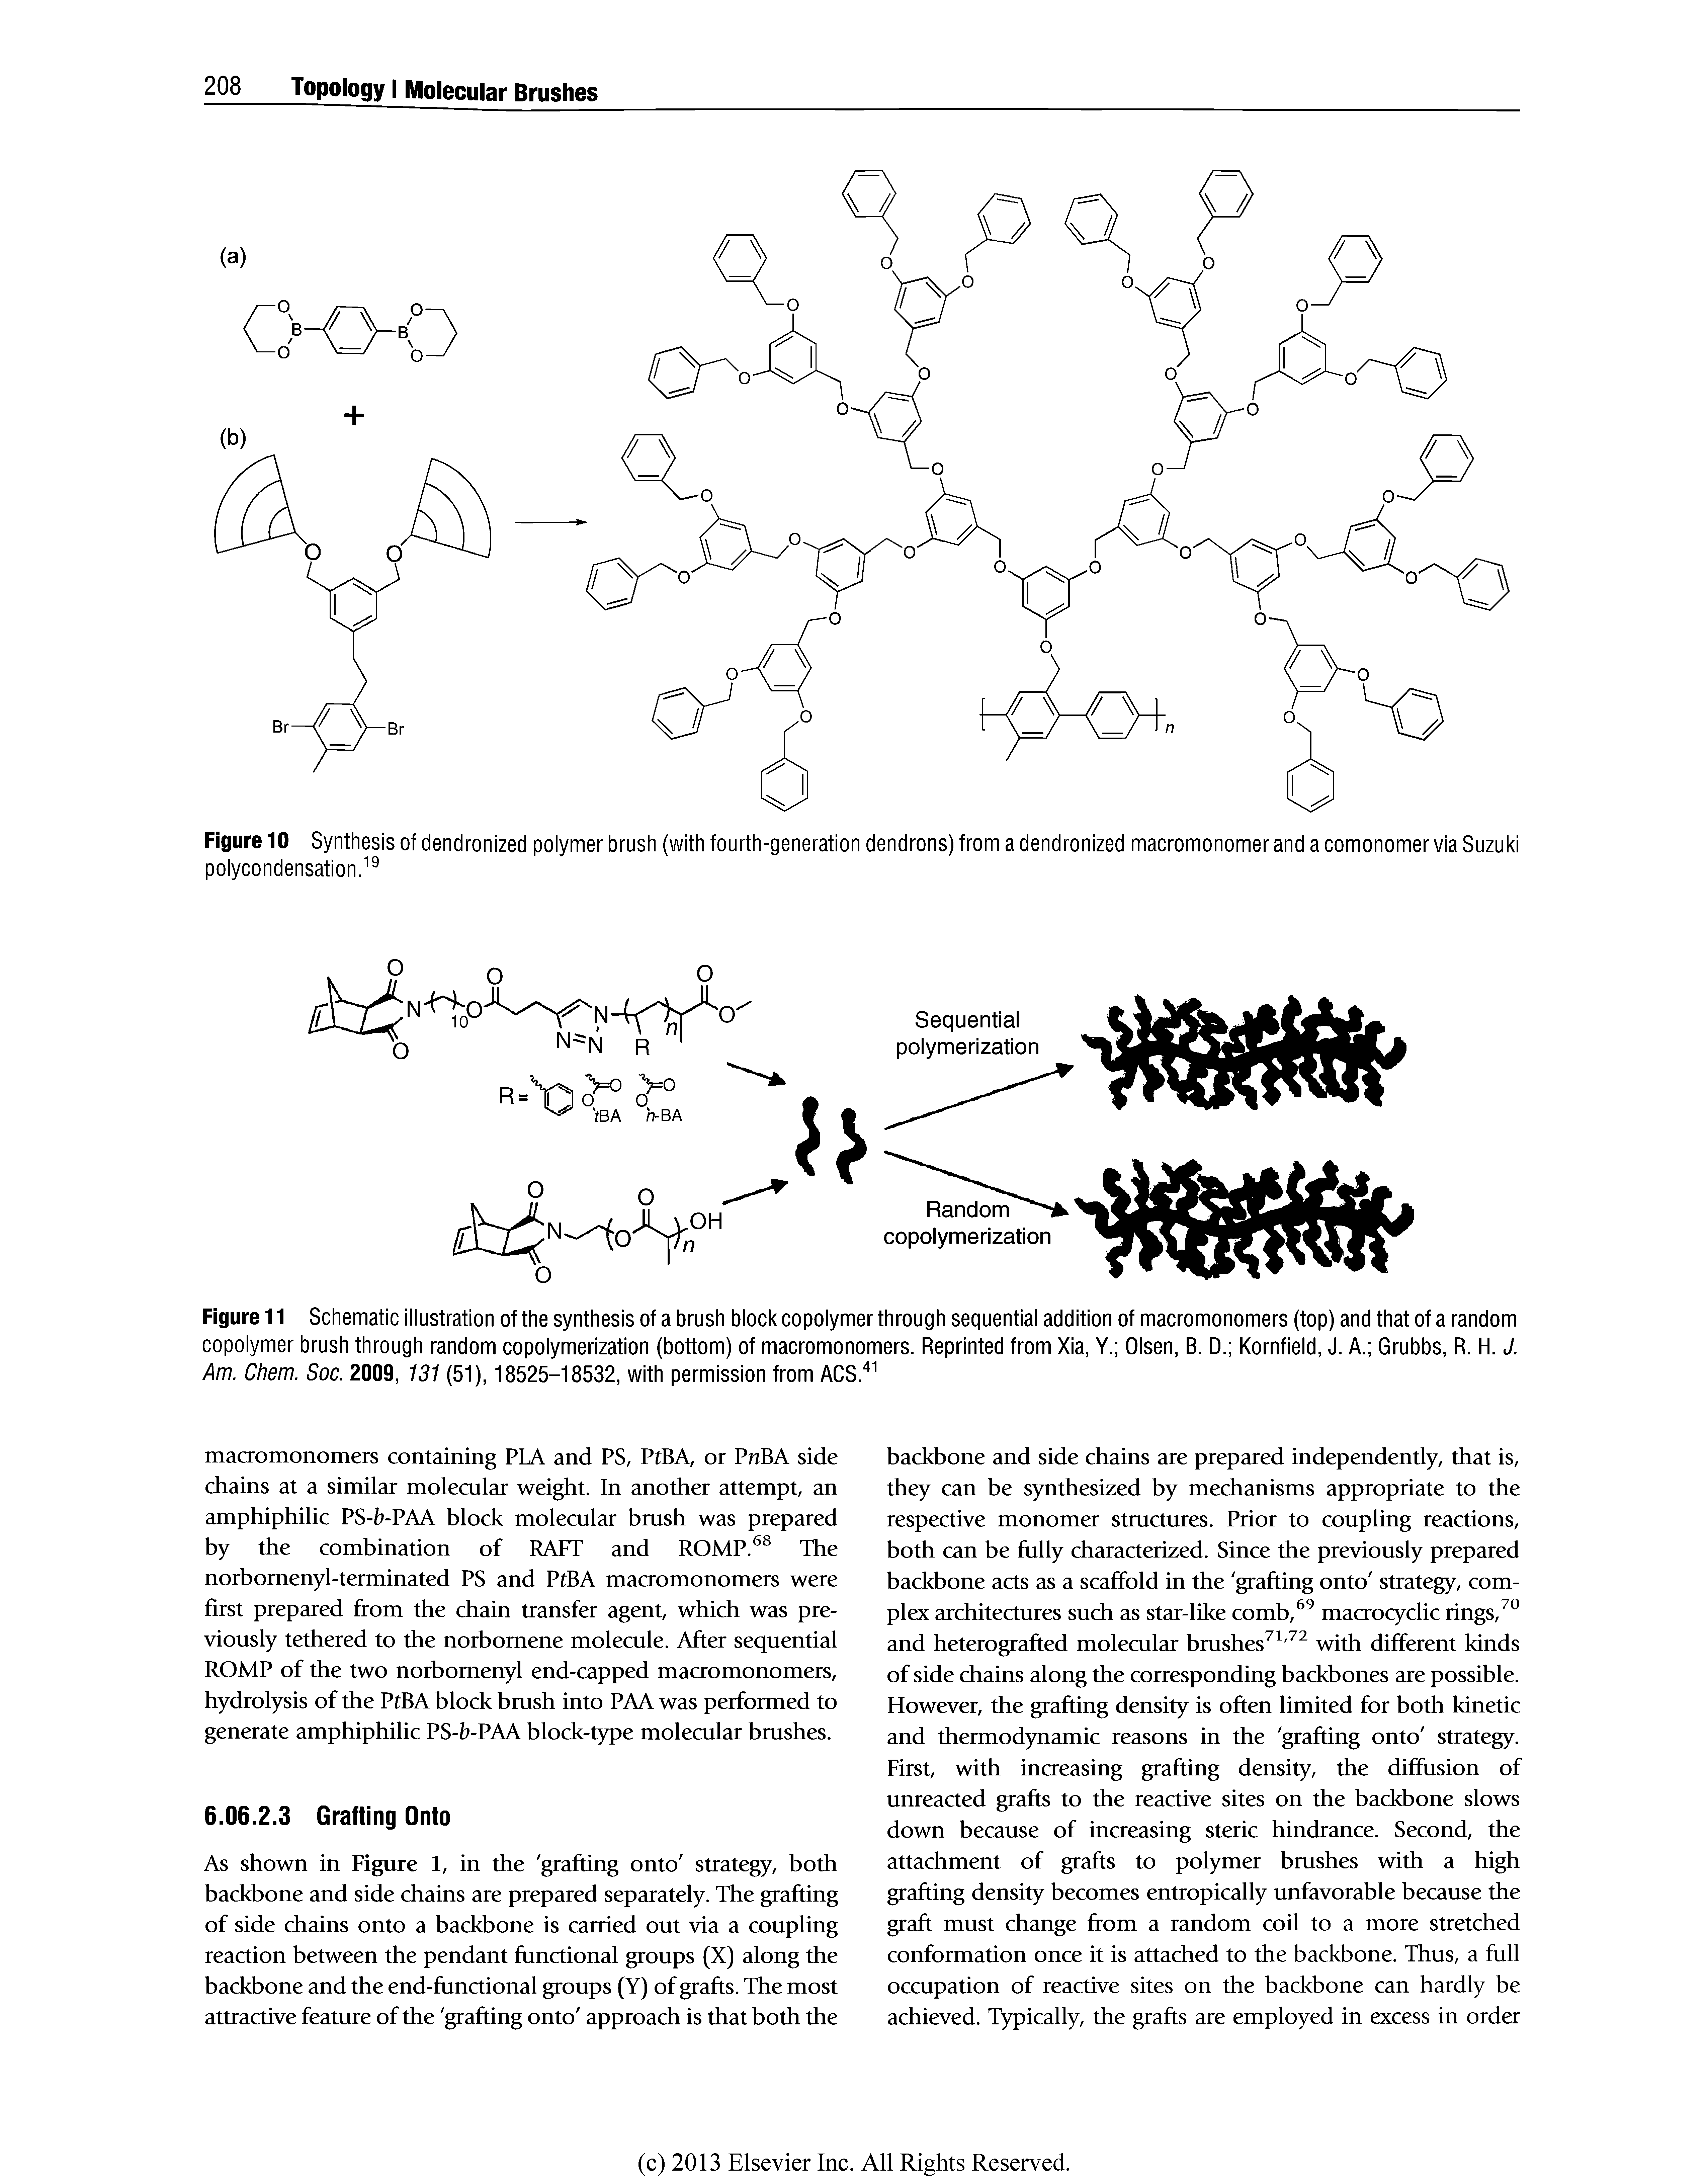 Figure 11 Schematic illustration of the synthesis of a brush block copolymer through sequential addition of macromonomers (top) and that of a random copolymer brush through random copolymerization (bottom) of macromonomers. Reprinted from Xia, Y. Olsen, B. D. Kornfield, J. A. Grubbs, R. H. J. Am. Chem. Soc. 2009, 131 (51), 18525-18532, with permission from ACS." ...